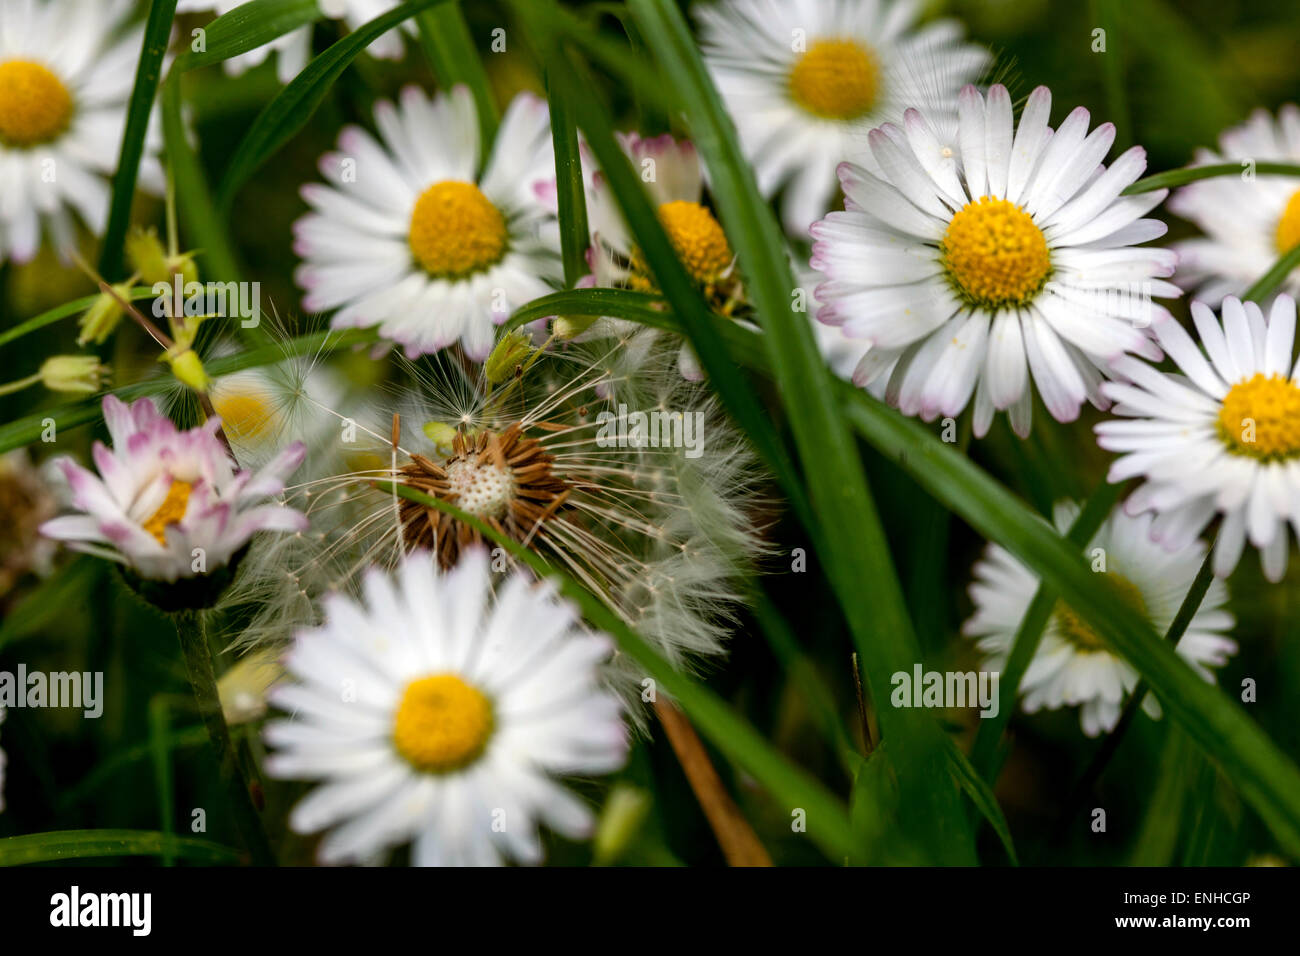 Common daisies, Bellis perennis wildflowers growing in grass lawn garden Stock Photo